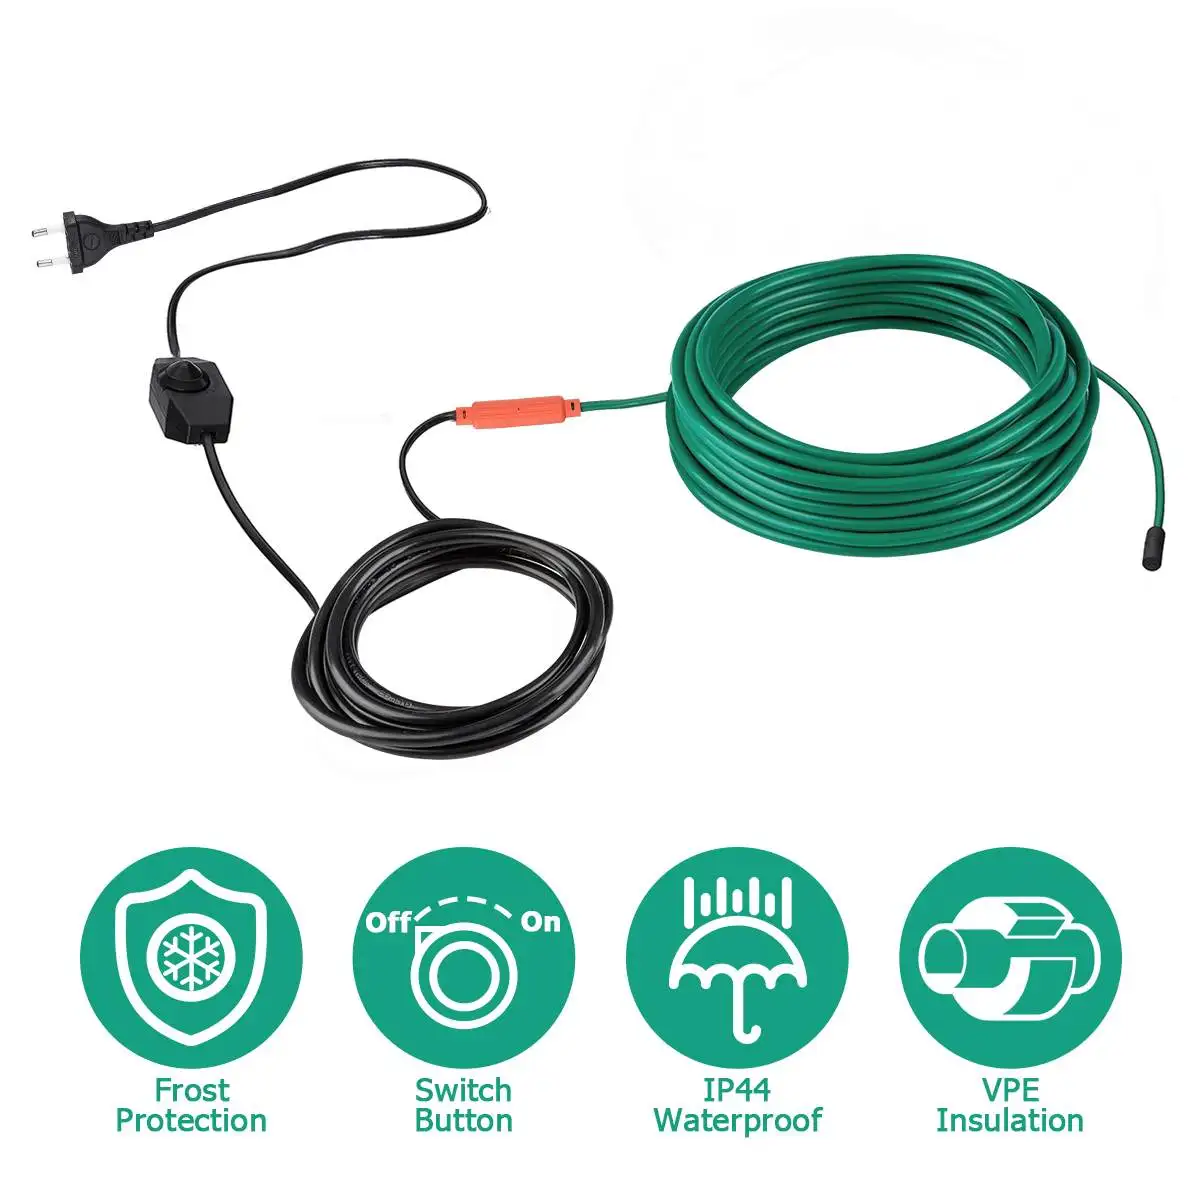 

220V EU Plug-in Power Cord Self Regulating Heating waterproof Cable for Water pipe Freeze Protection, Reptiles Pets Heating